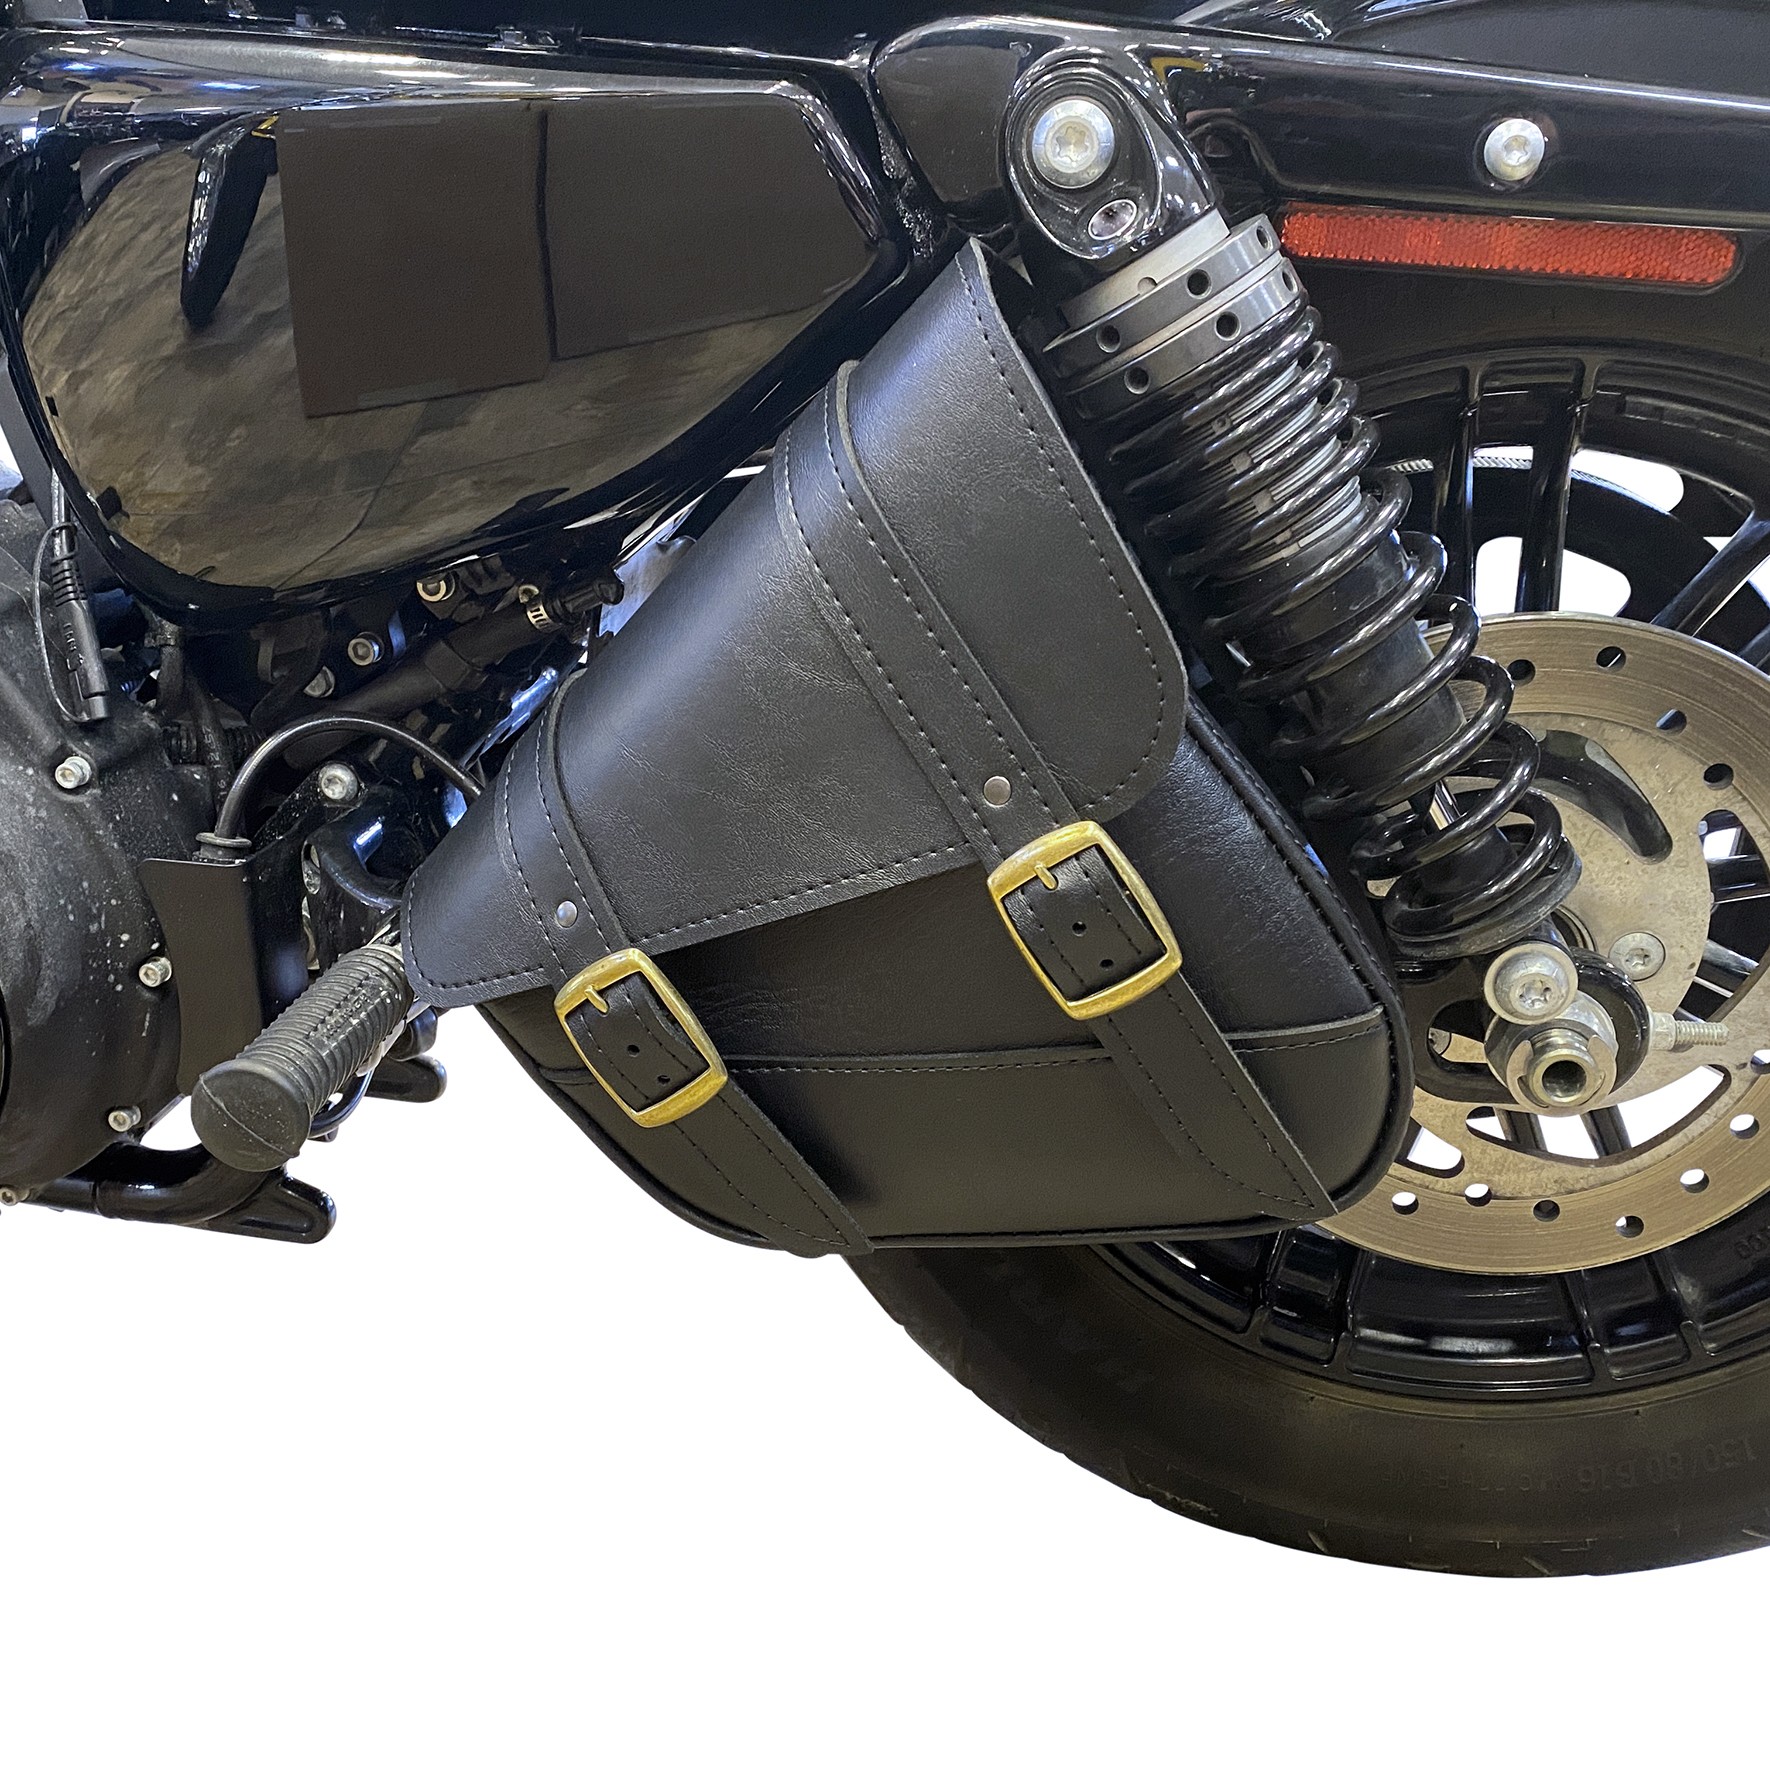 Black Swingarm Bag with Brass Buckles for Sportster